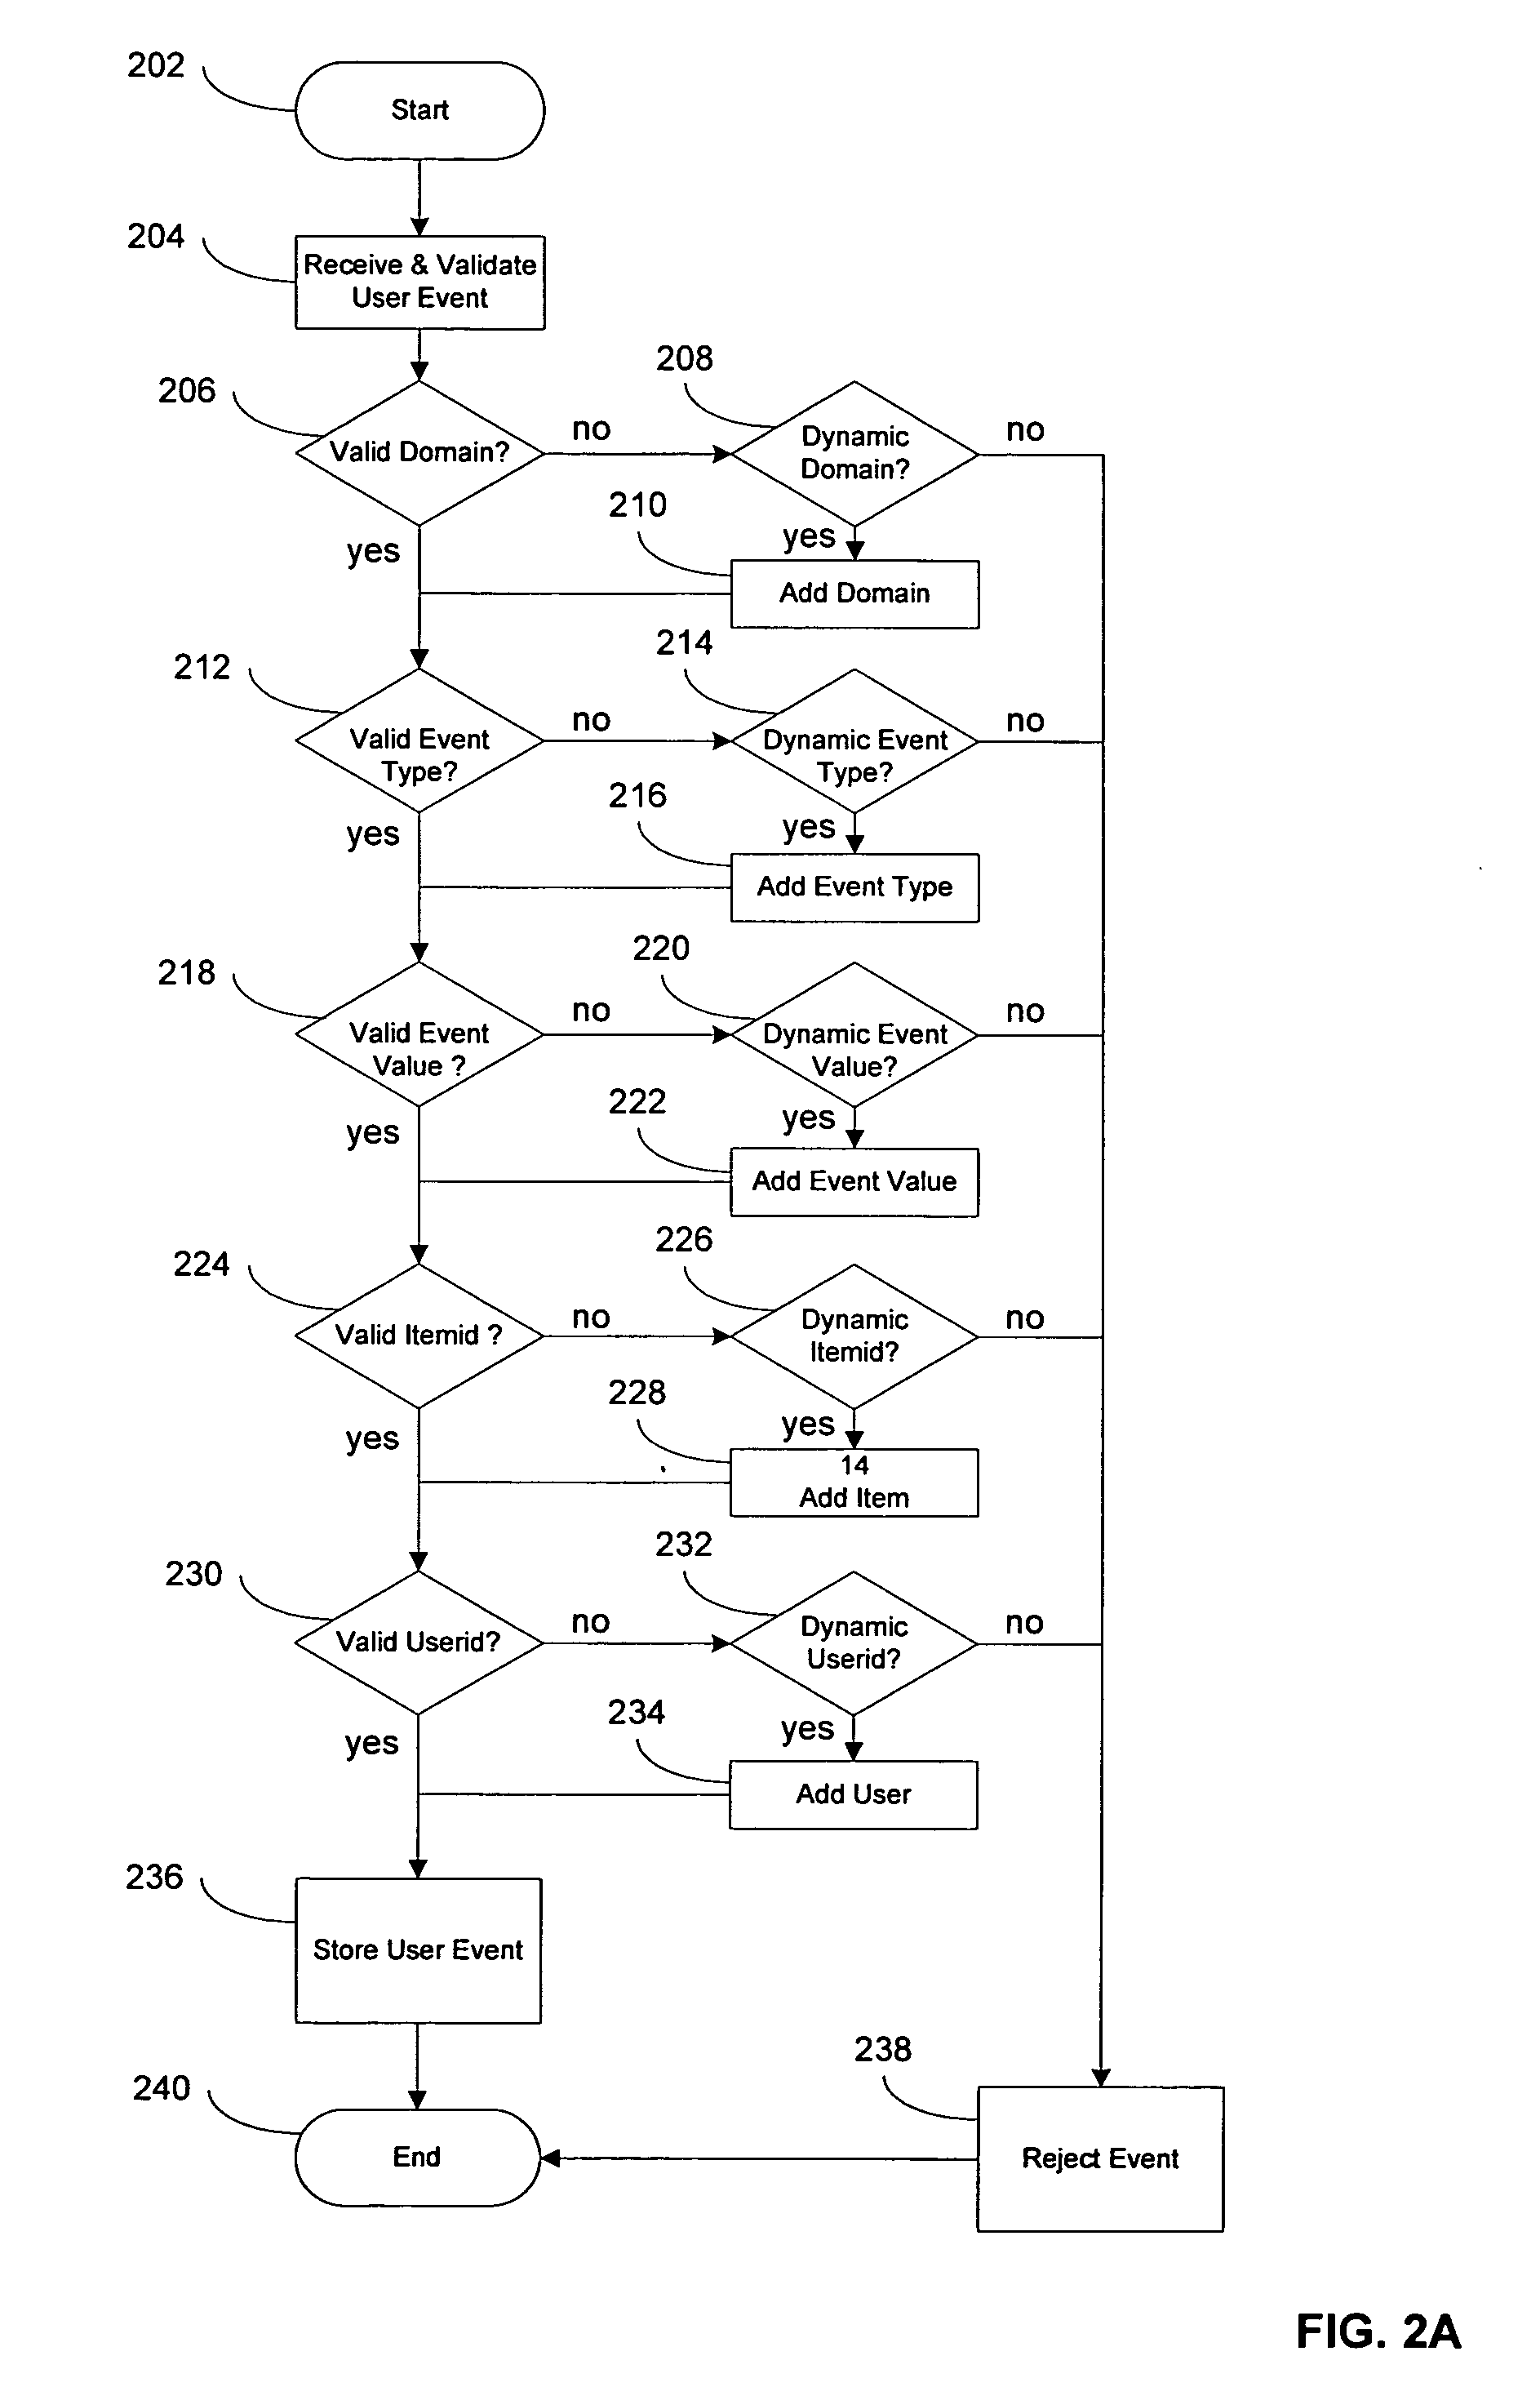 Method and system for generating recommendations